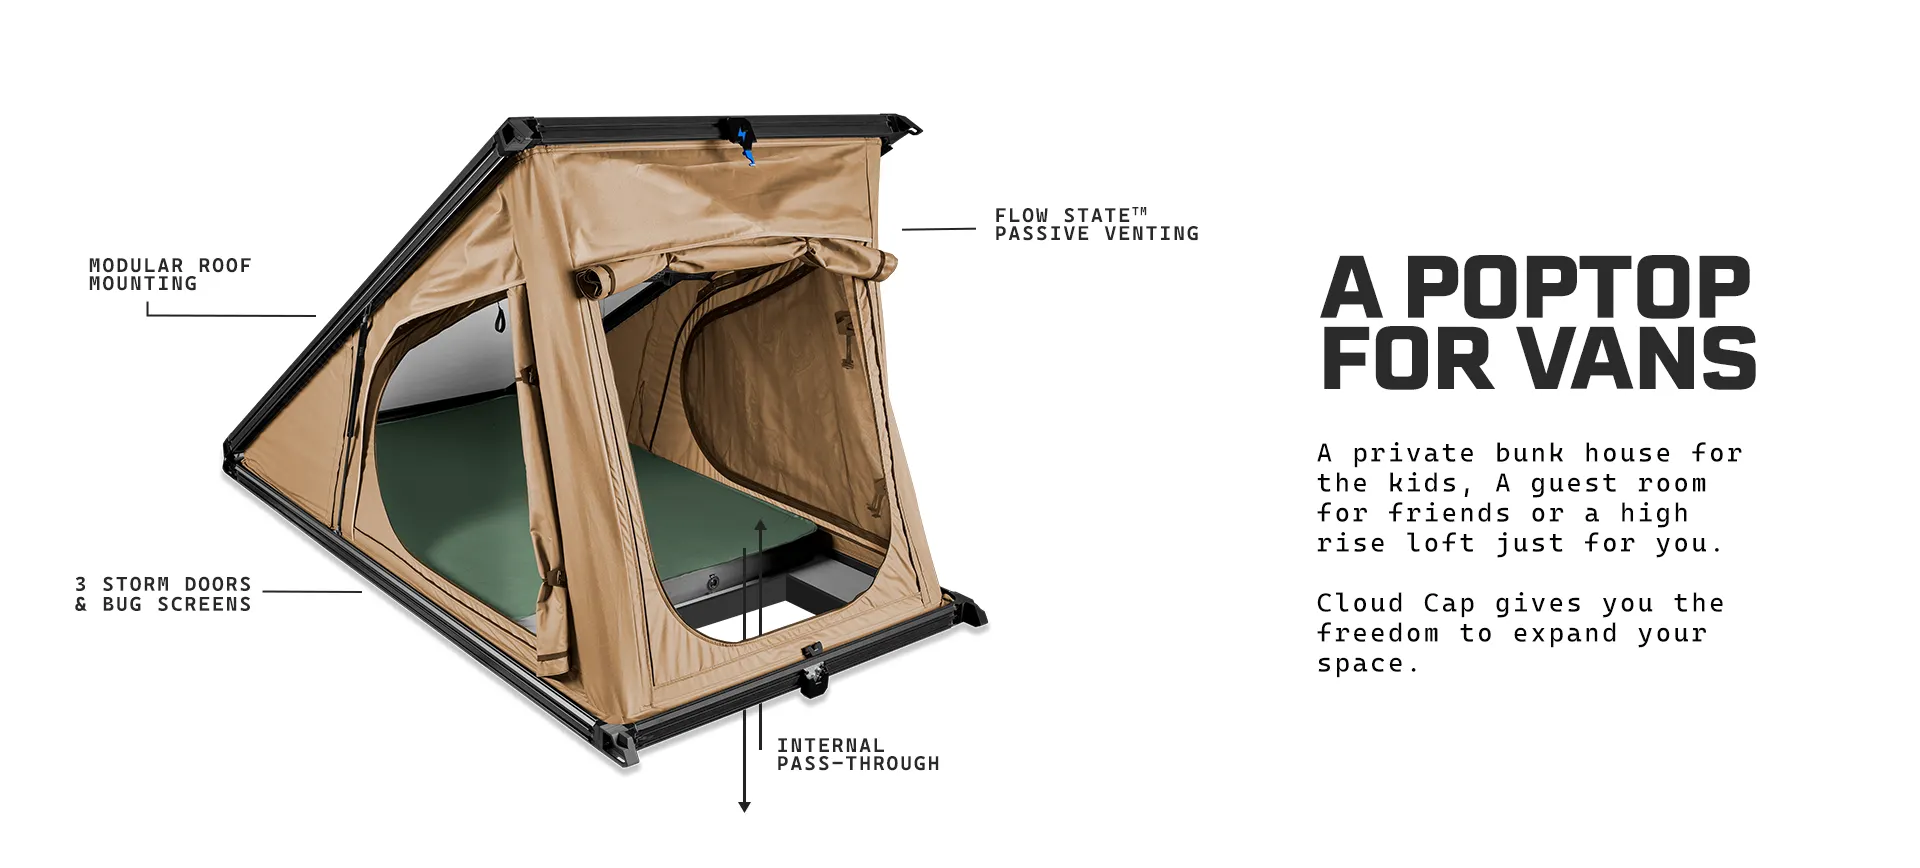 Image of Cloud Cap rooftop tent with features called out.